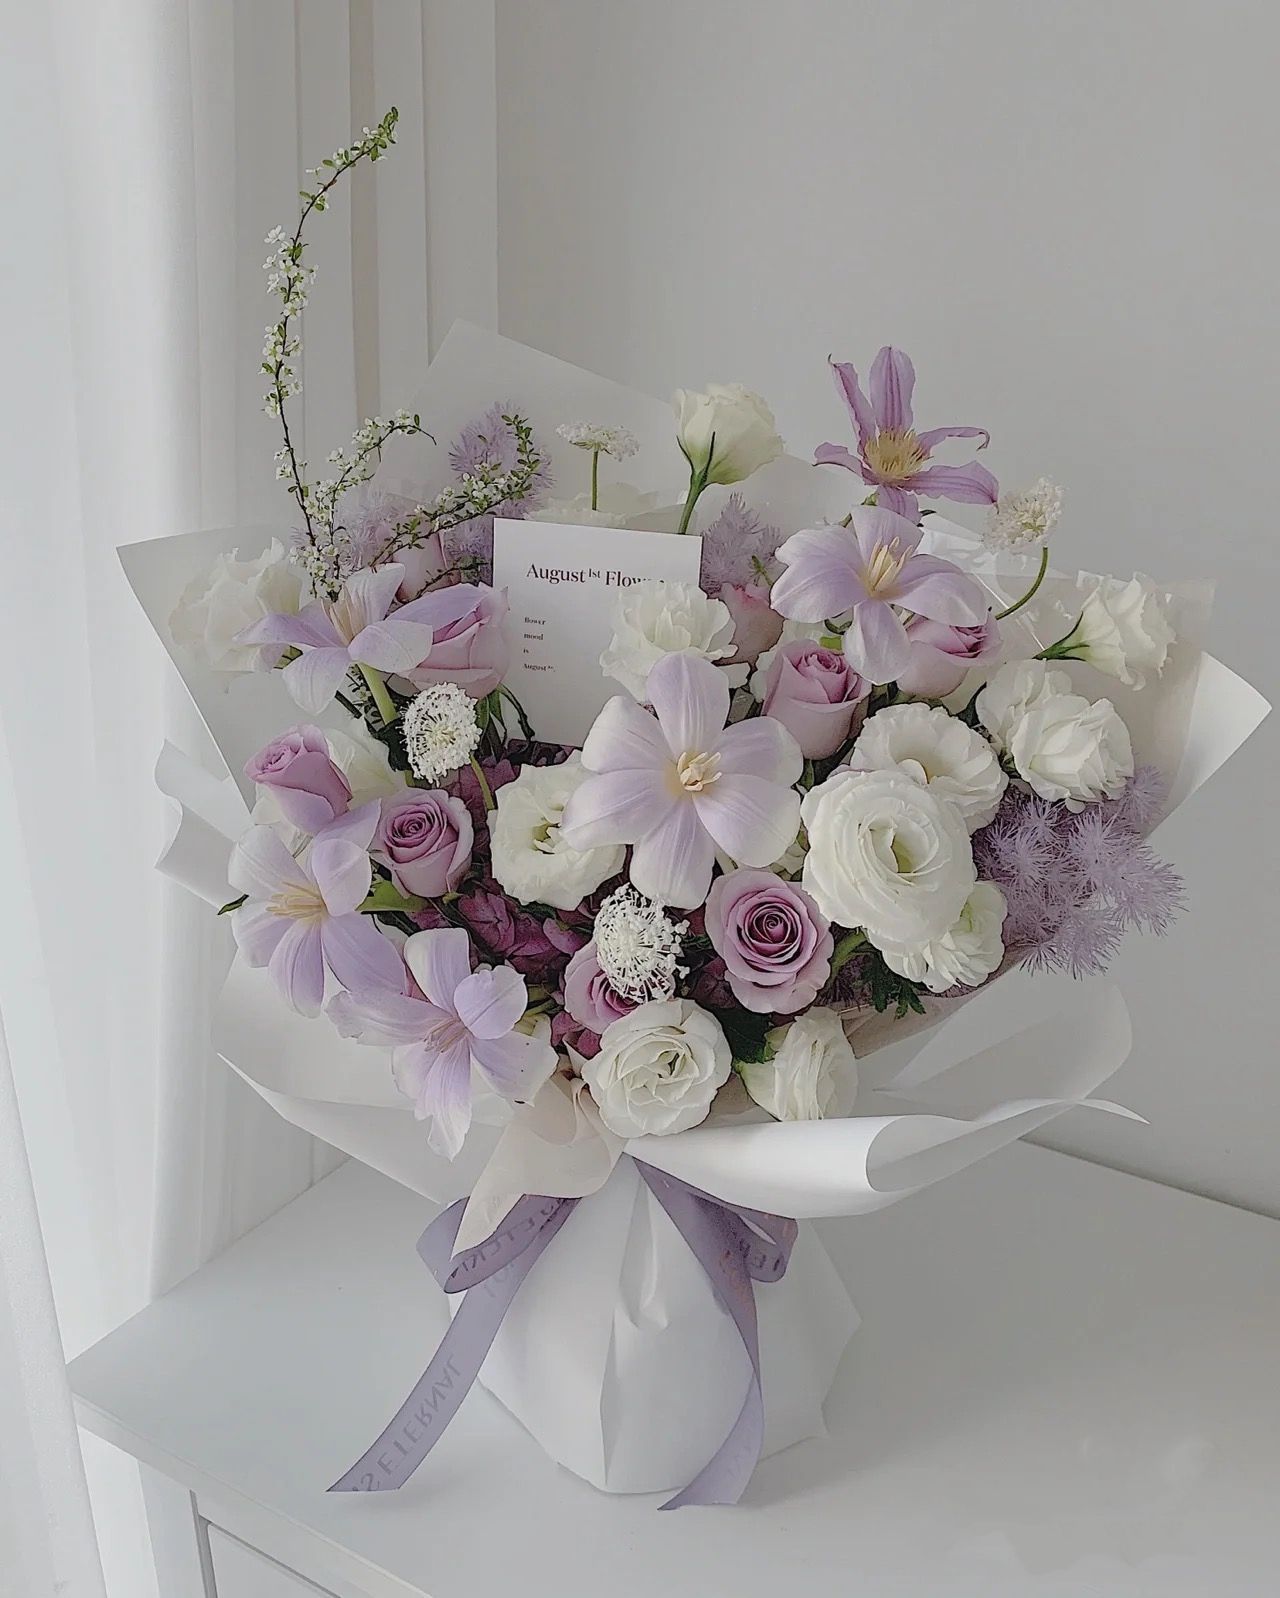 Graduation Flowers The Perfect Gift For Your Graduating Loved Ones